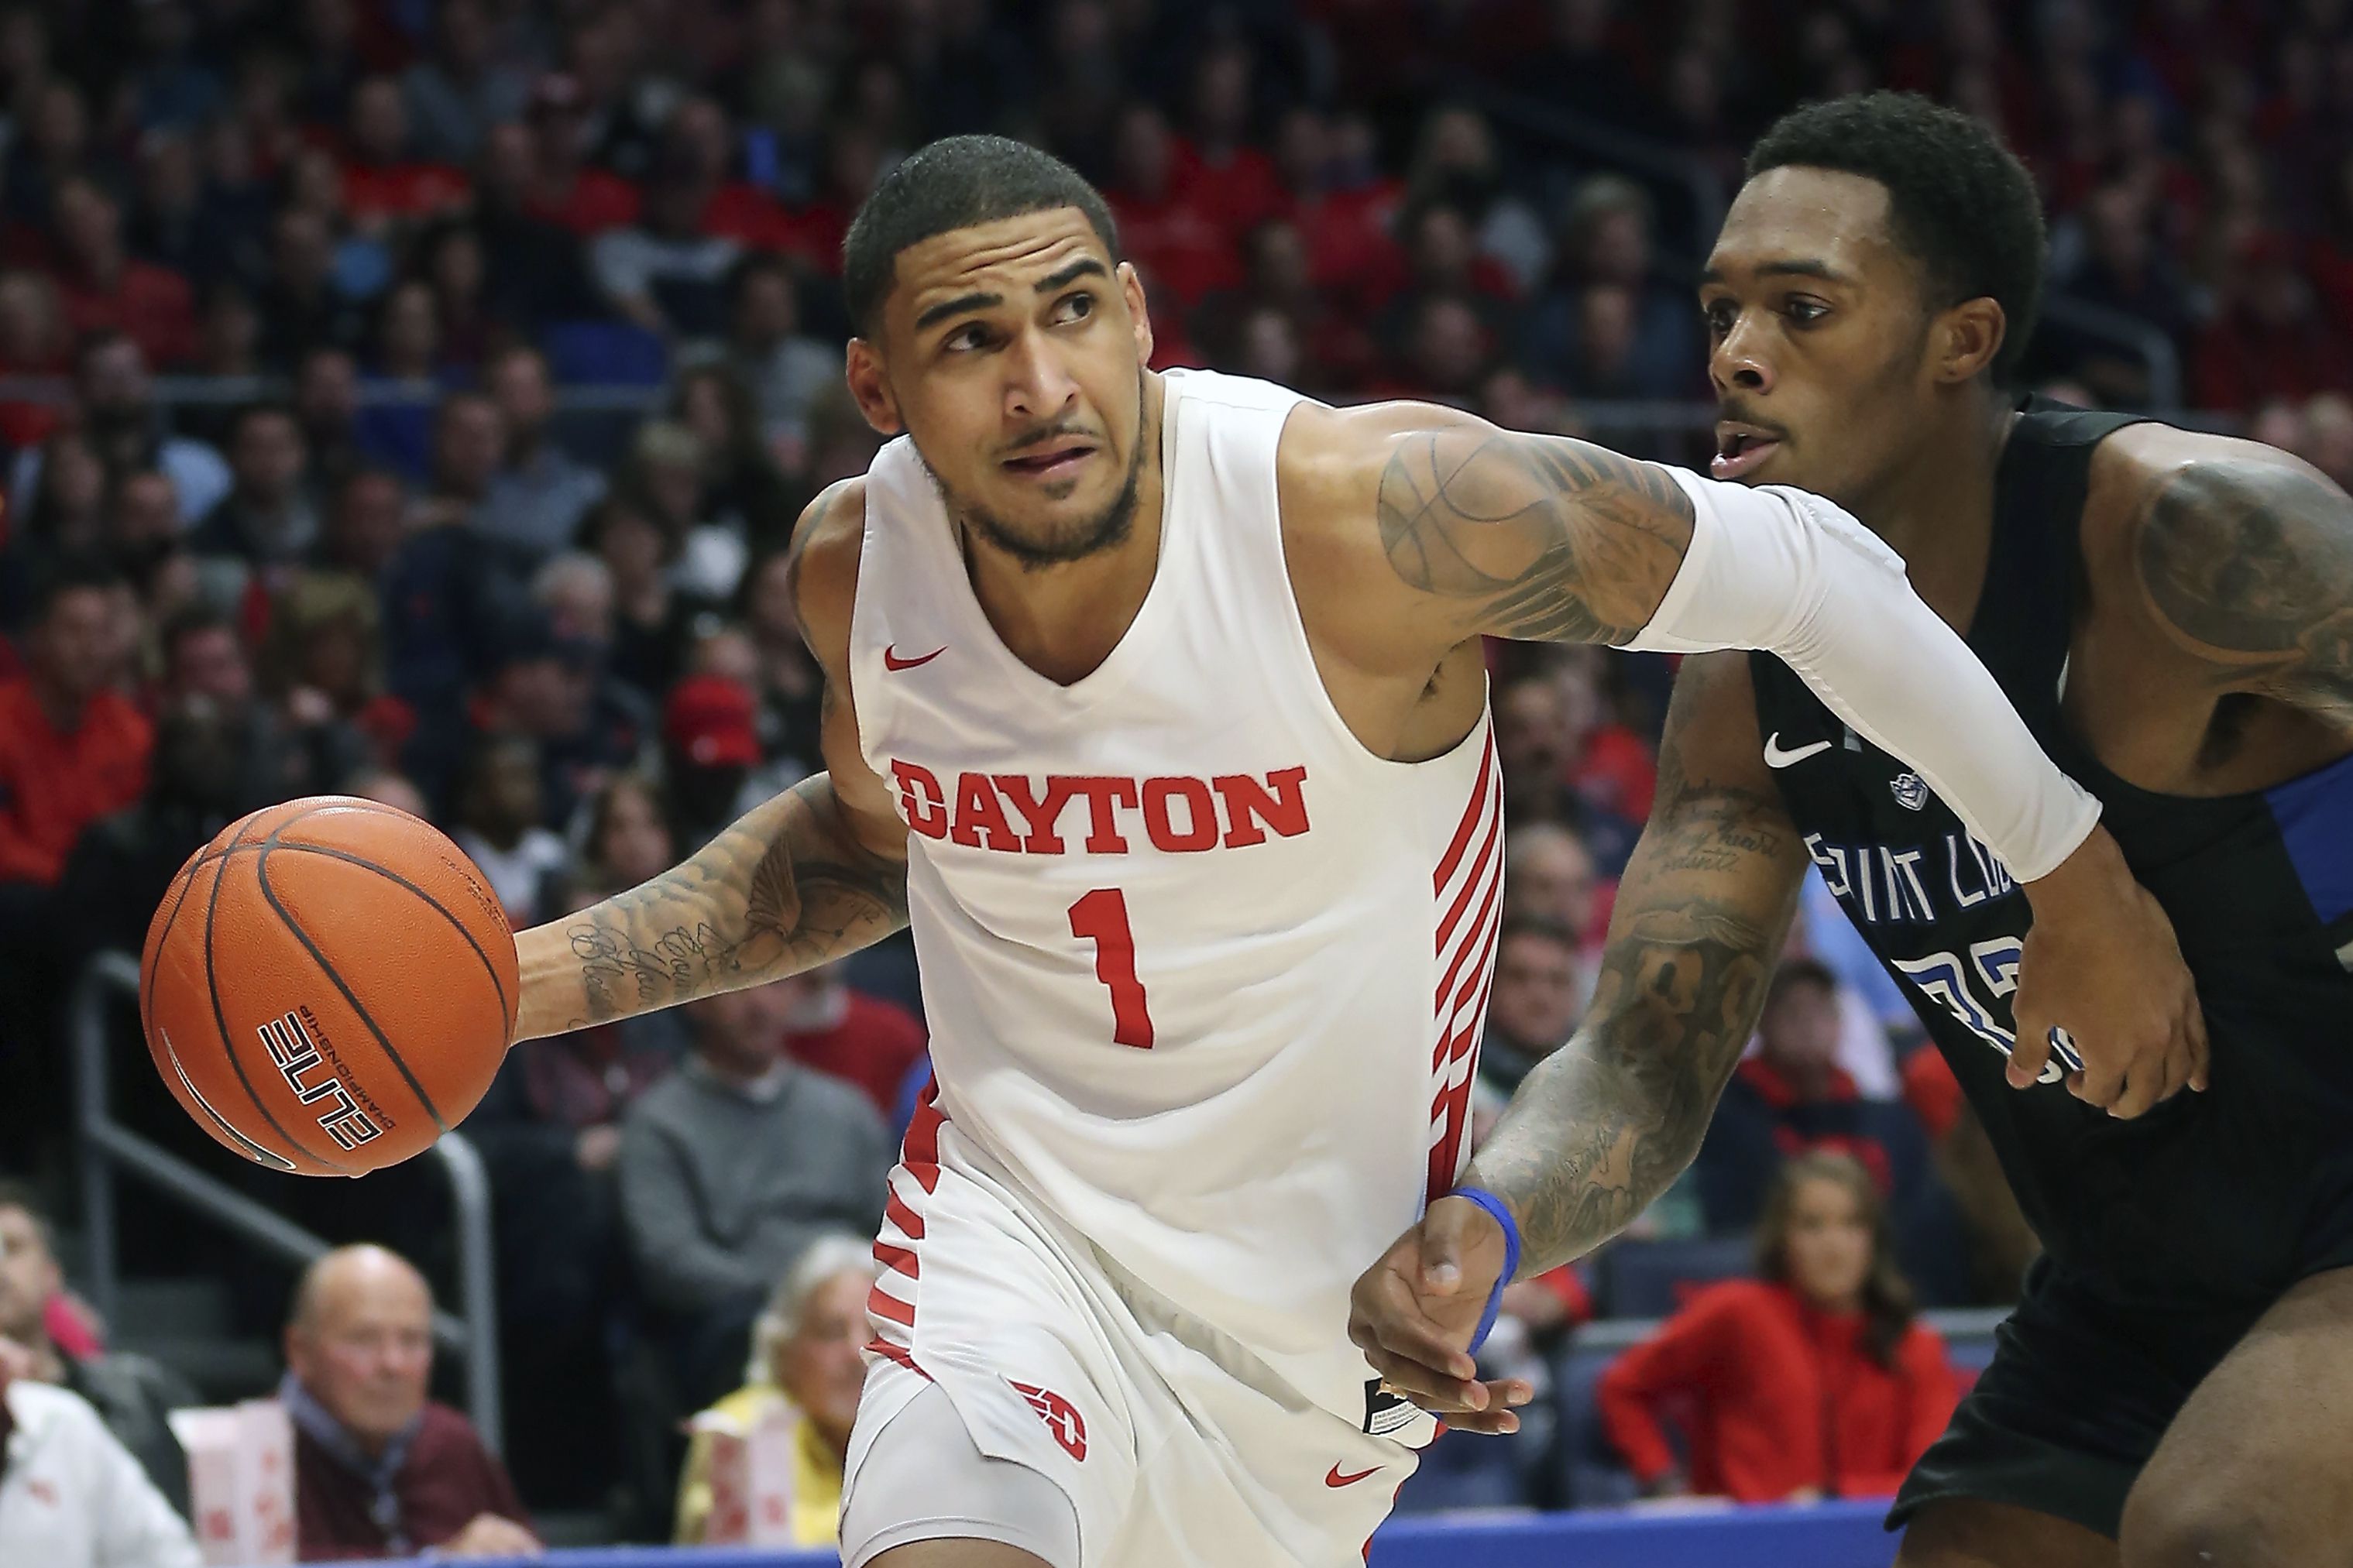 Dayton's Obi Toppin, Ossining grad, named AP Player of the Year